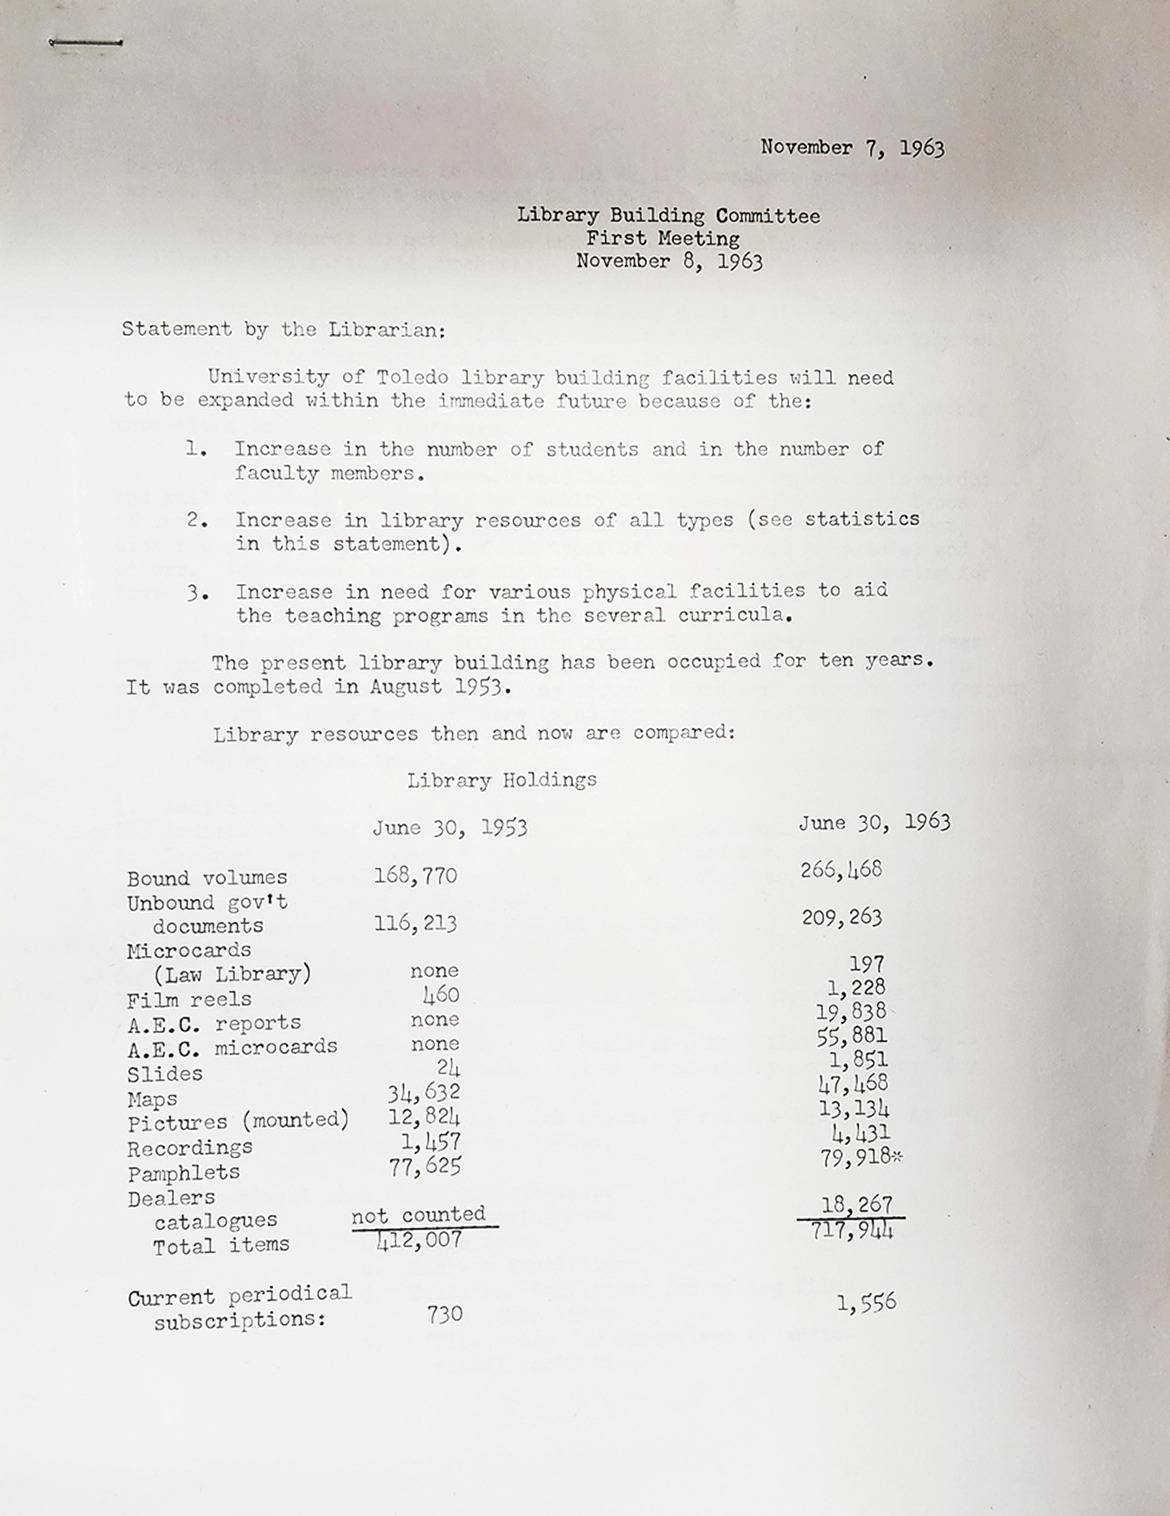 Library Building Committee, First meeting, November 8, 1963 (minutes)